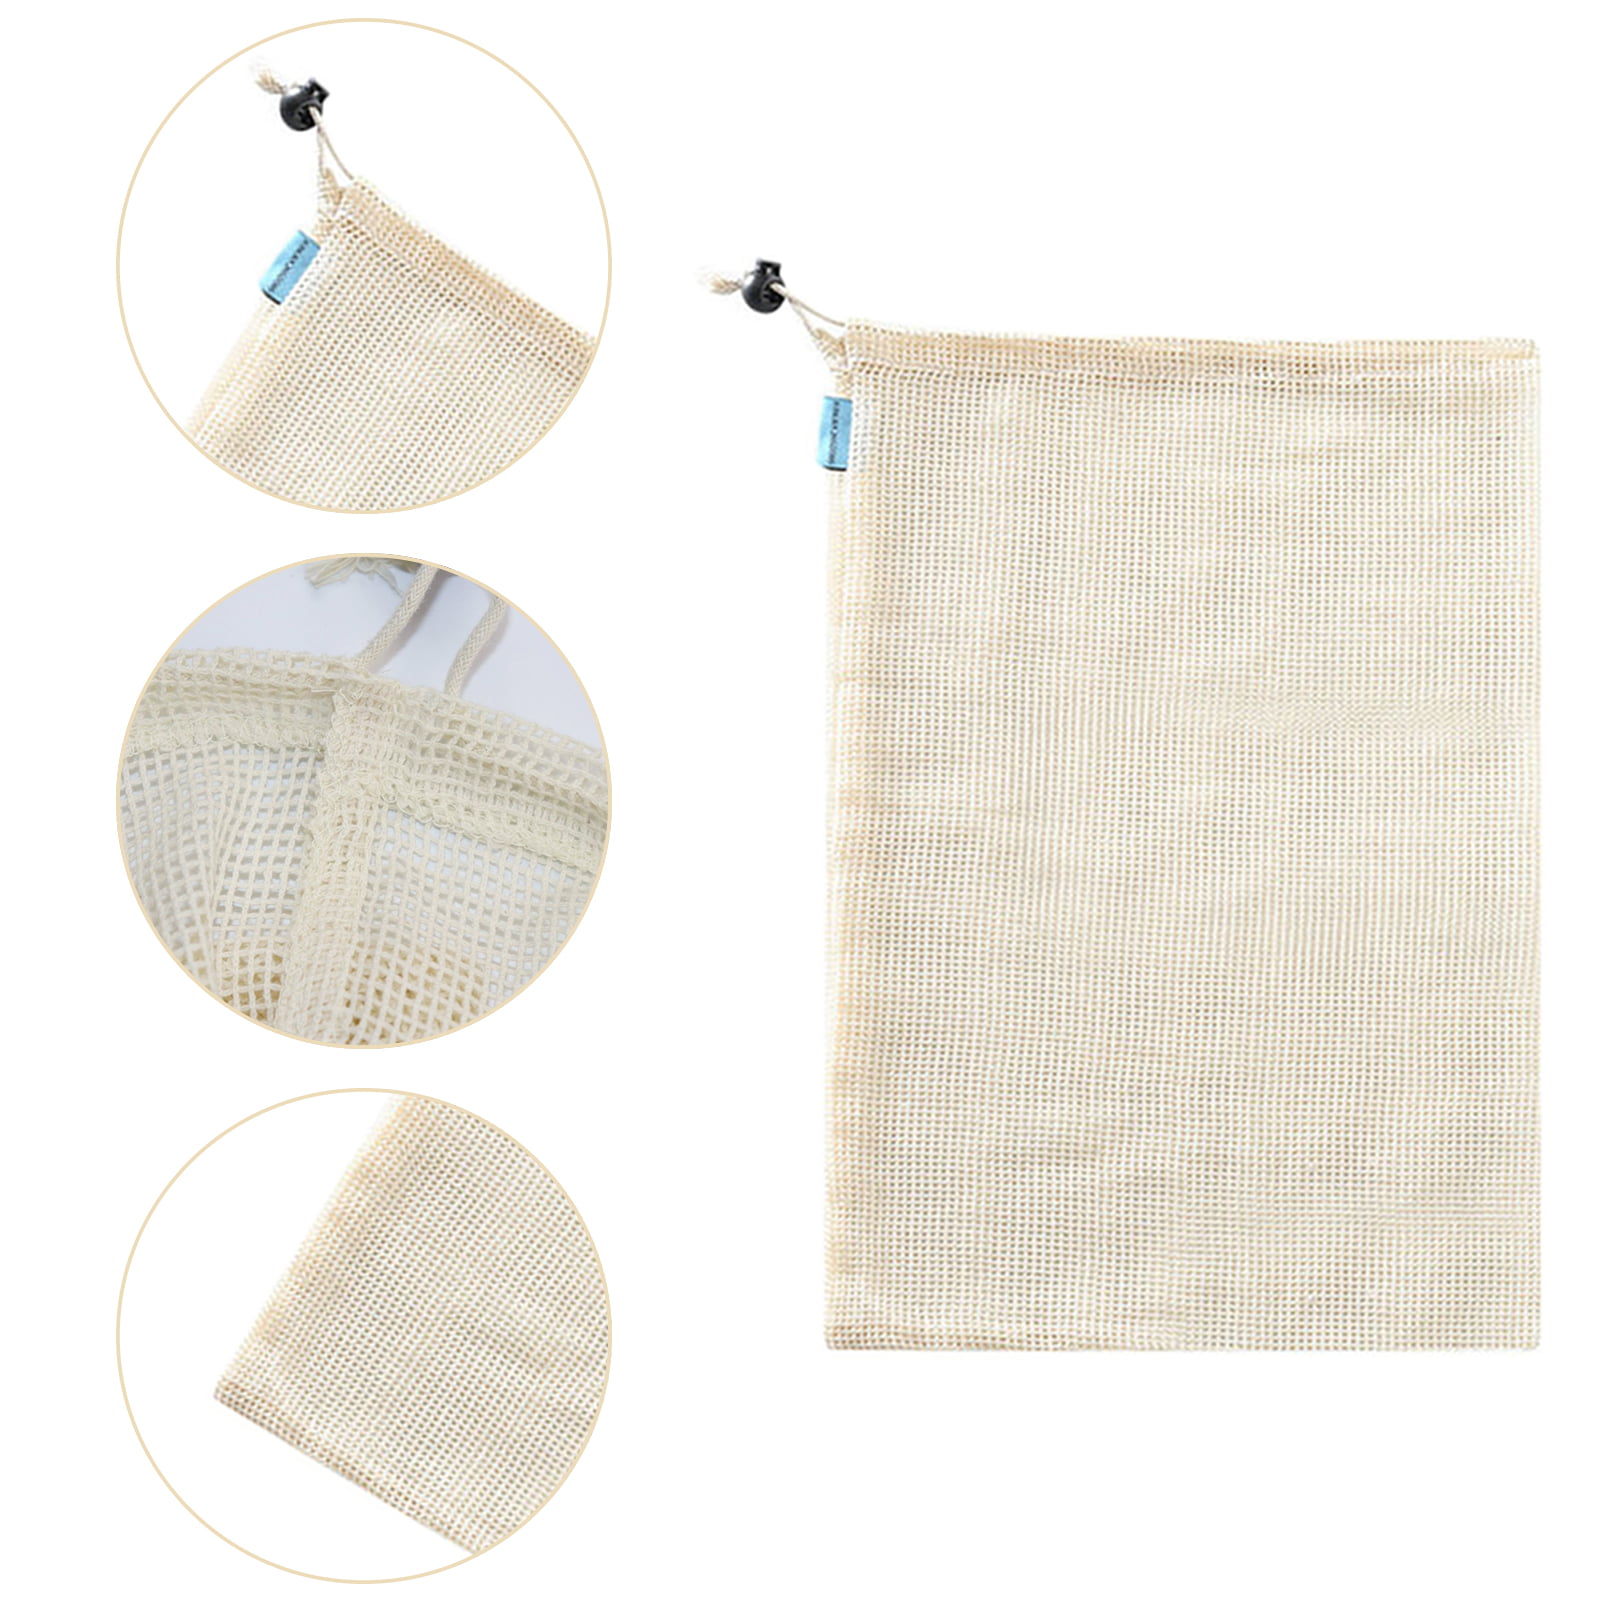 5 Packs Reusable Cotton Muslin Bags Bread Storage Bags 11.8 x 13.7 Inch 